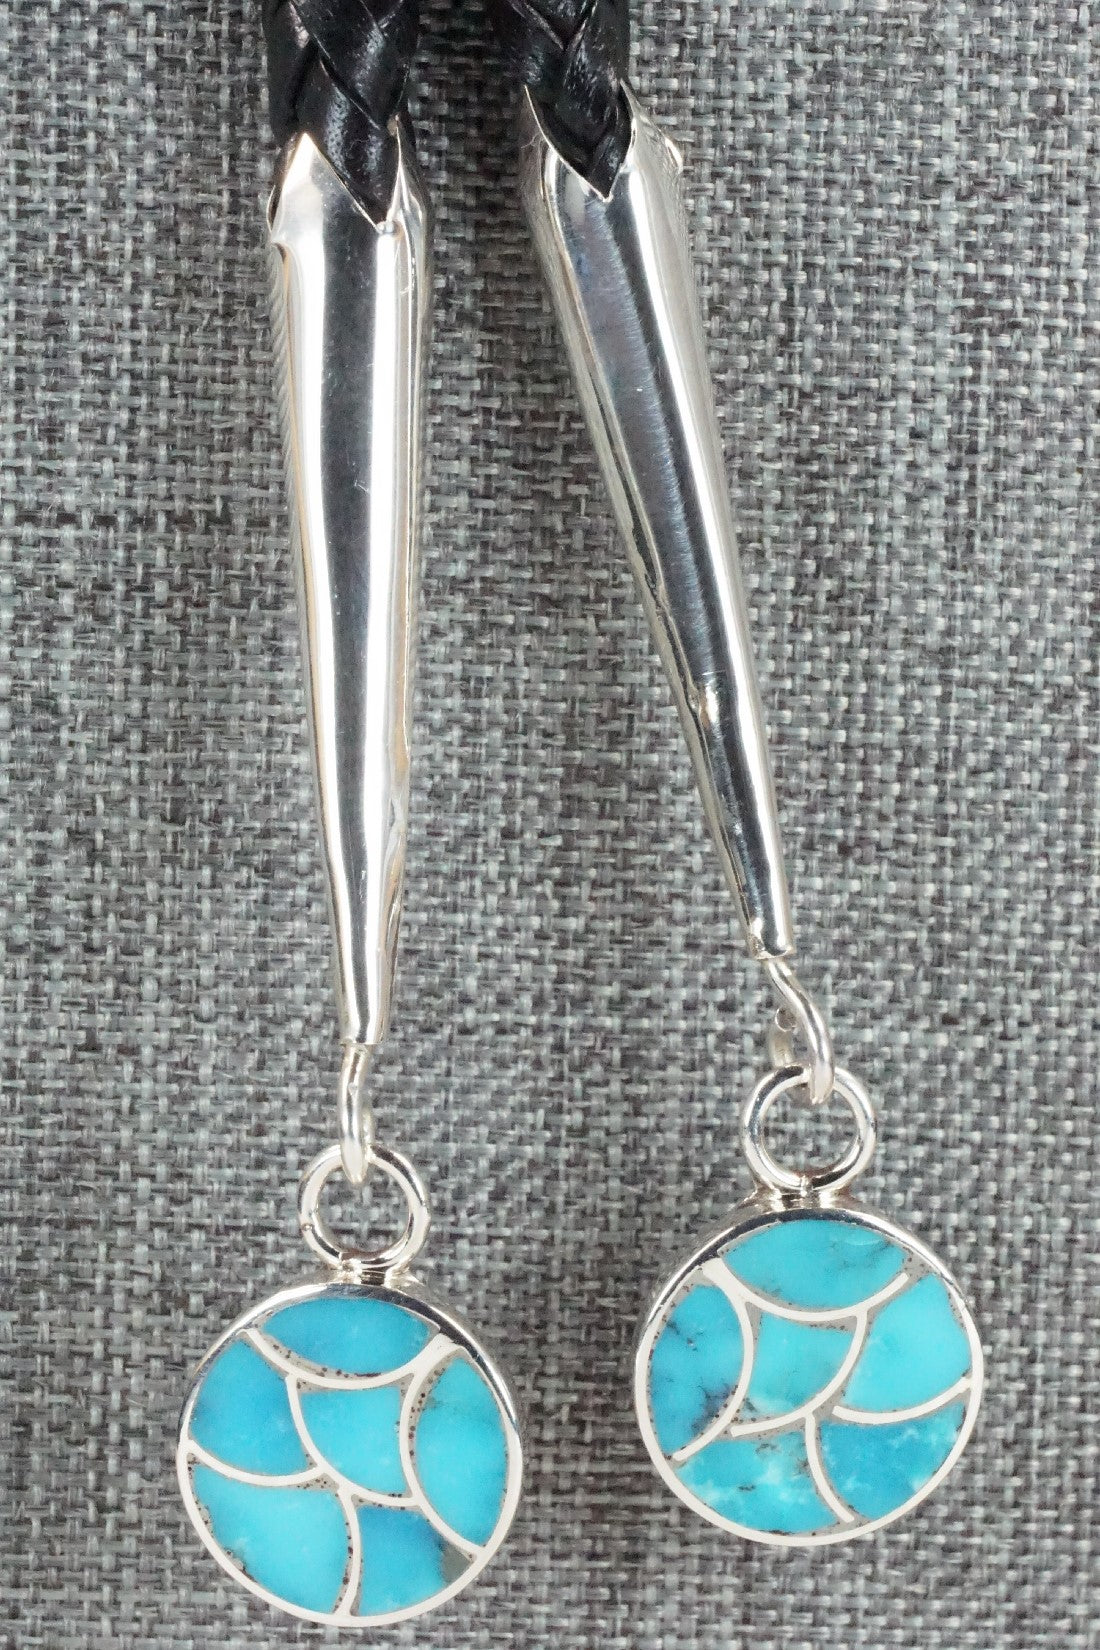 Turquoise & Sterling Silver Bolo Tie - Lynelle Johnson